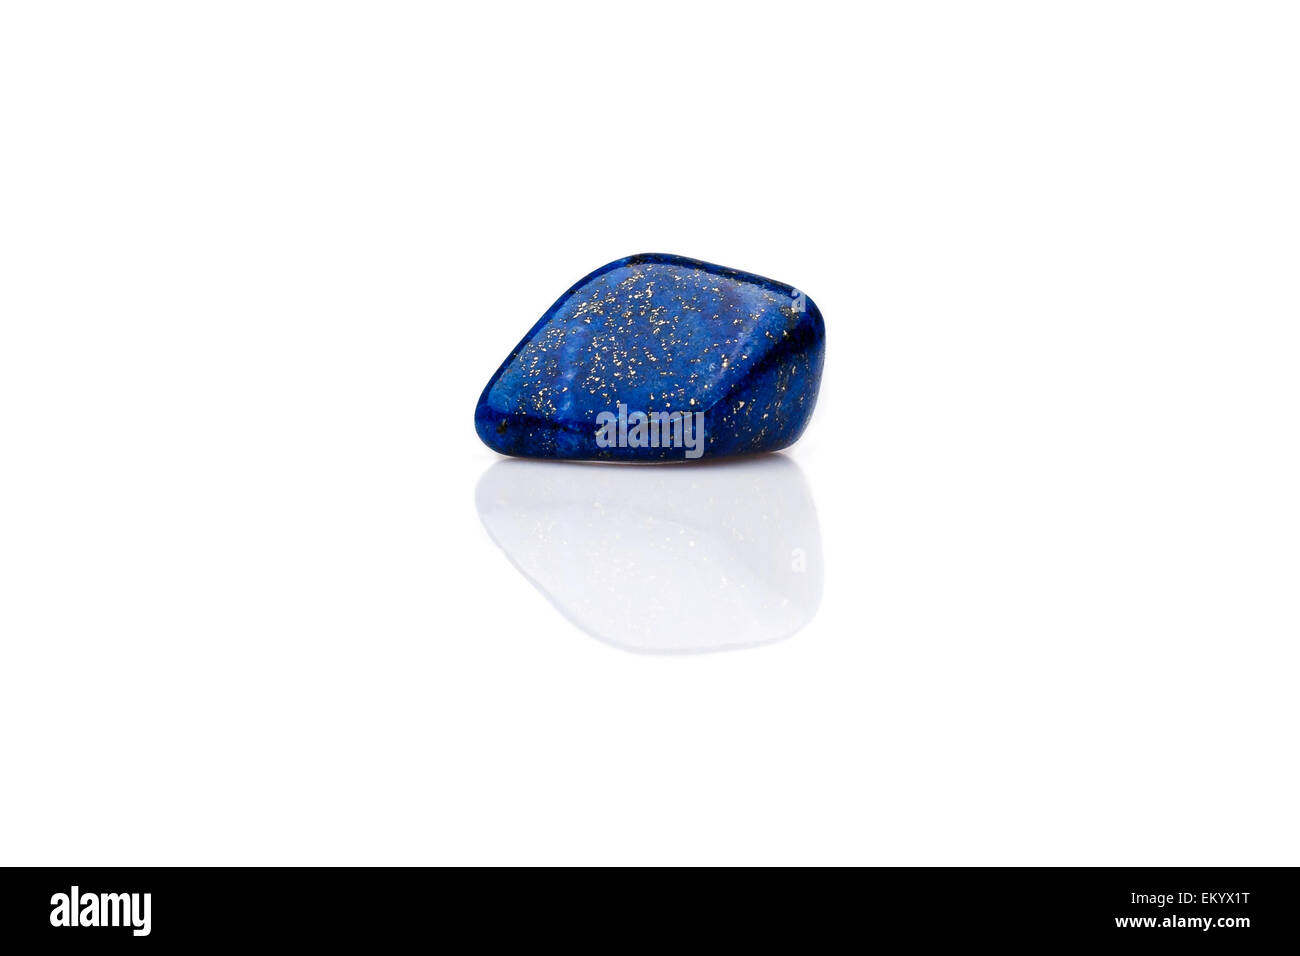 Beautiful blue lapis lazuli gem stone isolated on white background. Found in Afghanistan, deep blue color. Stock Photo